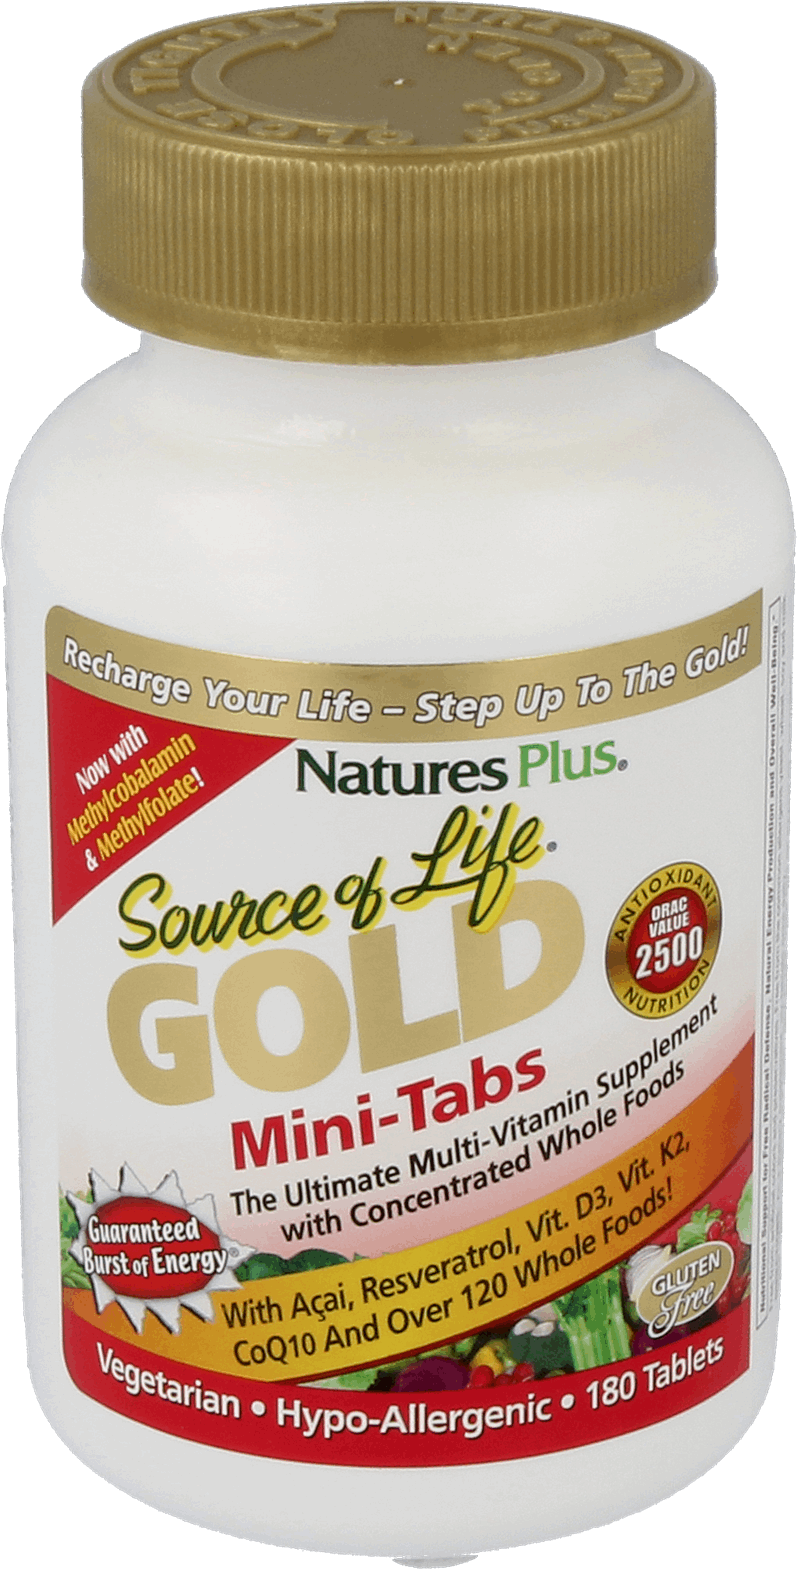 Source of Life® GOLD minis 